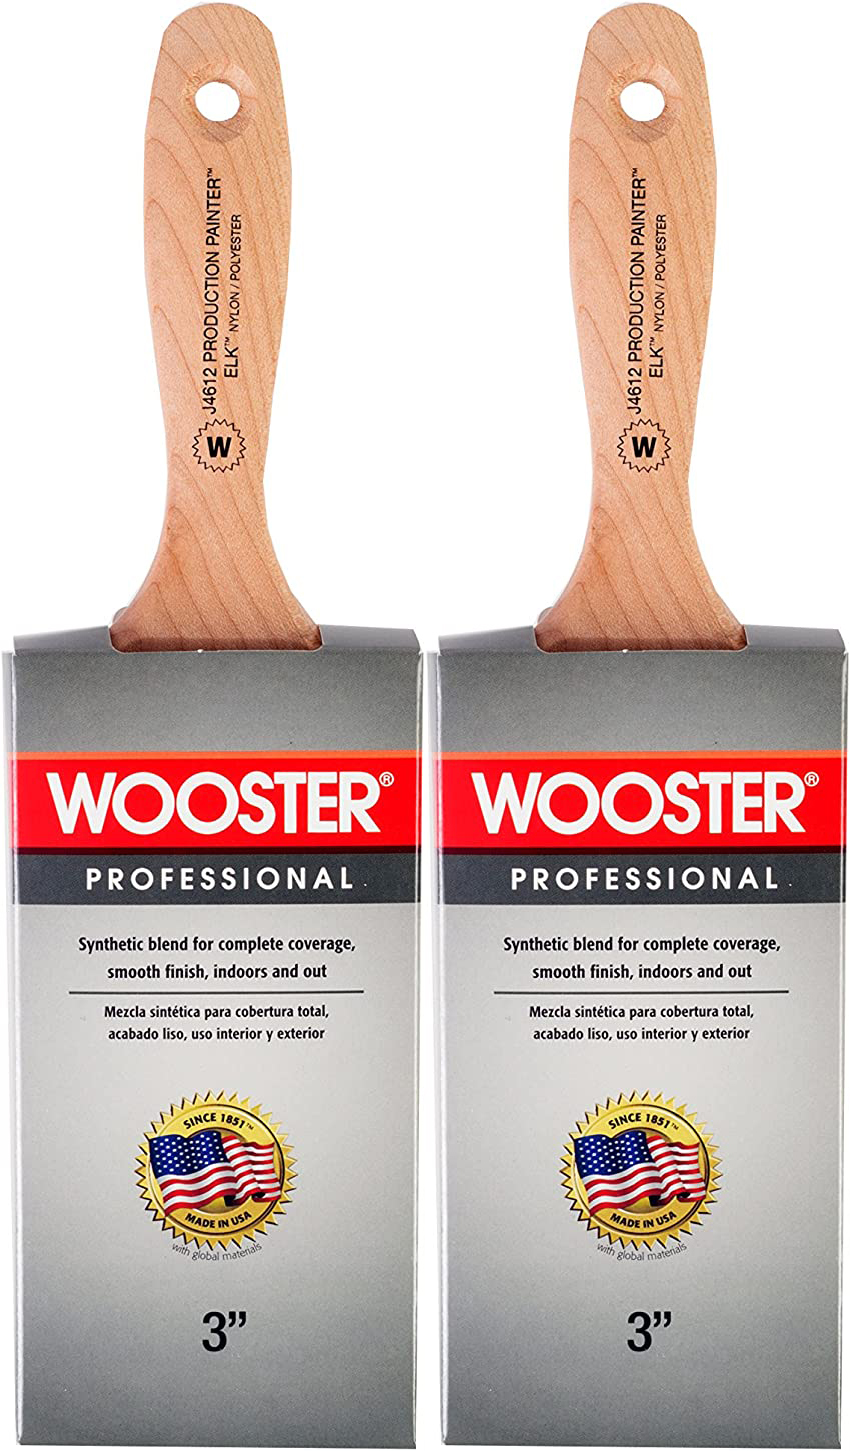 Wooster Genuine 3" Production Painter Extra-Thick Flat Paintbrush 2-Pack # J4612-3-2PK